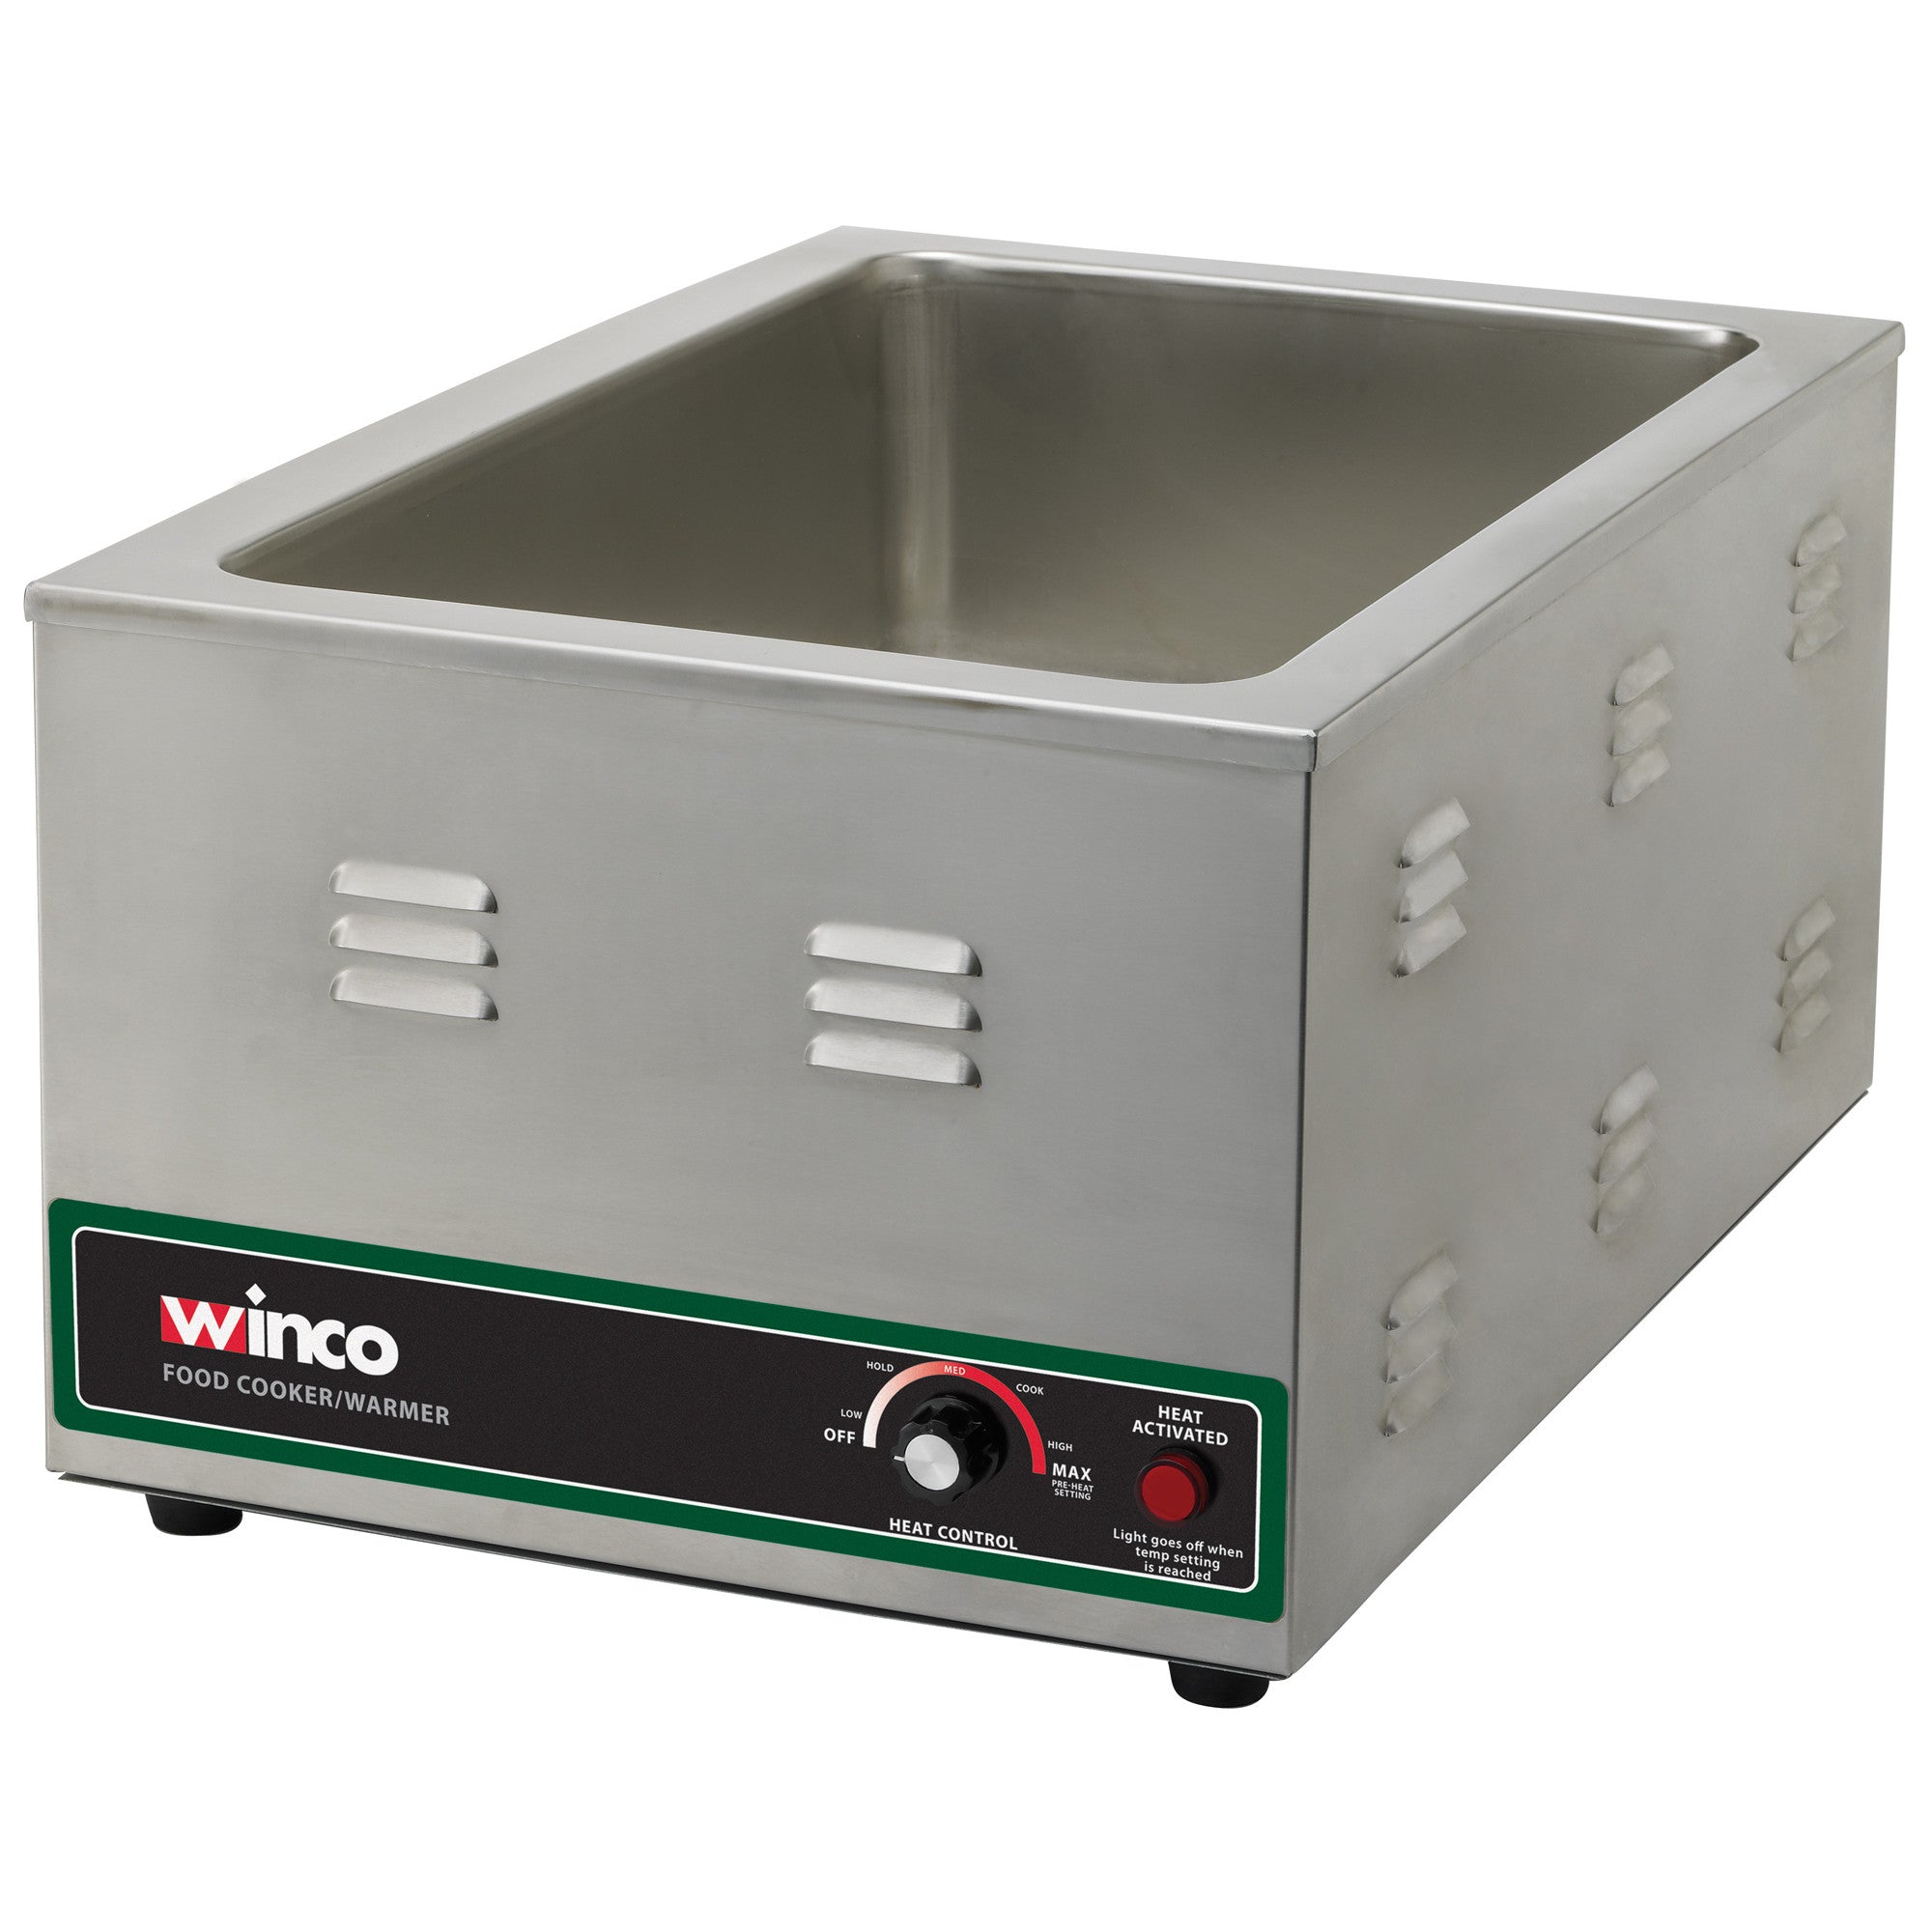 FW-S600 - Electric Food Cooker/Warmer, 1500W – Winco